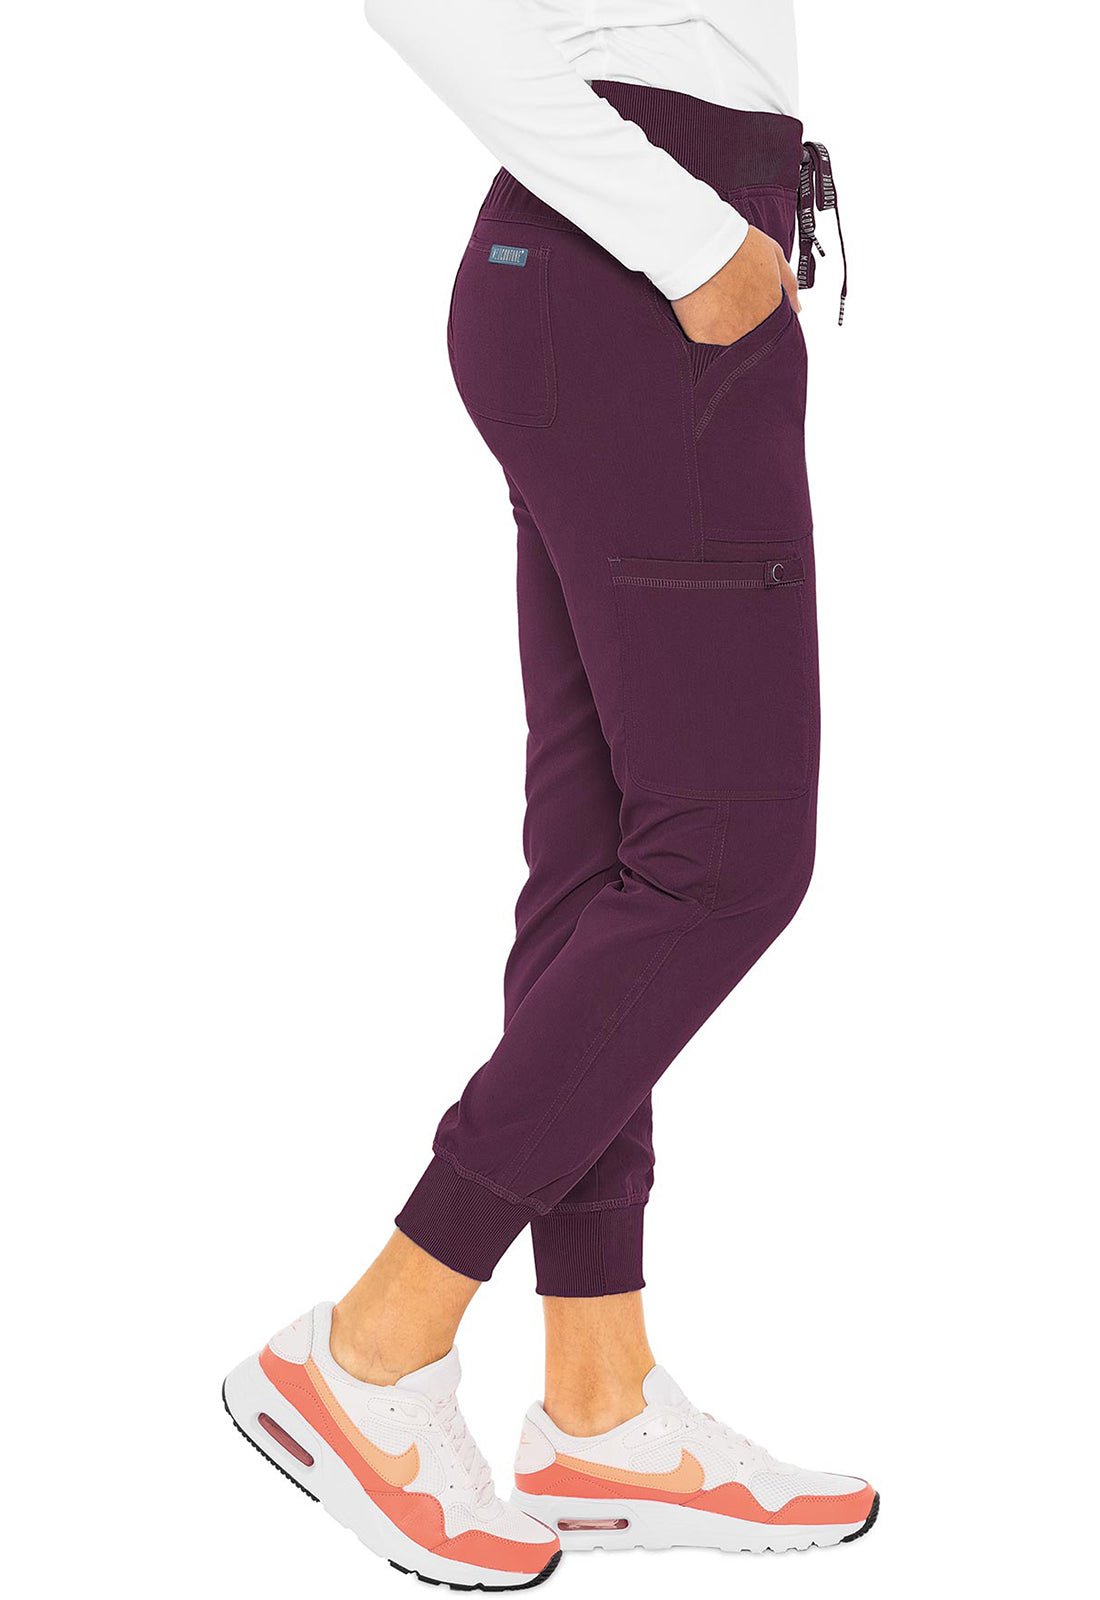 Med Couture Touch Jogger Yoga Scrub Pant MC7710 in Cloud, Olive, Teal, Wine - Scrubs Select